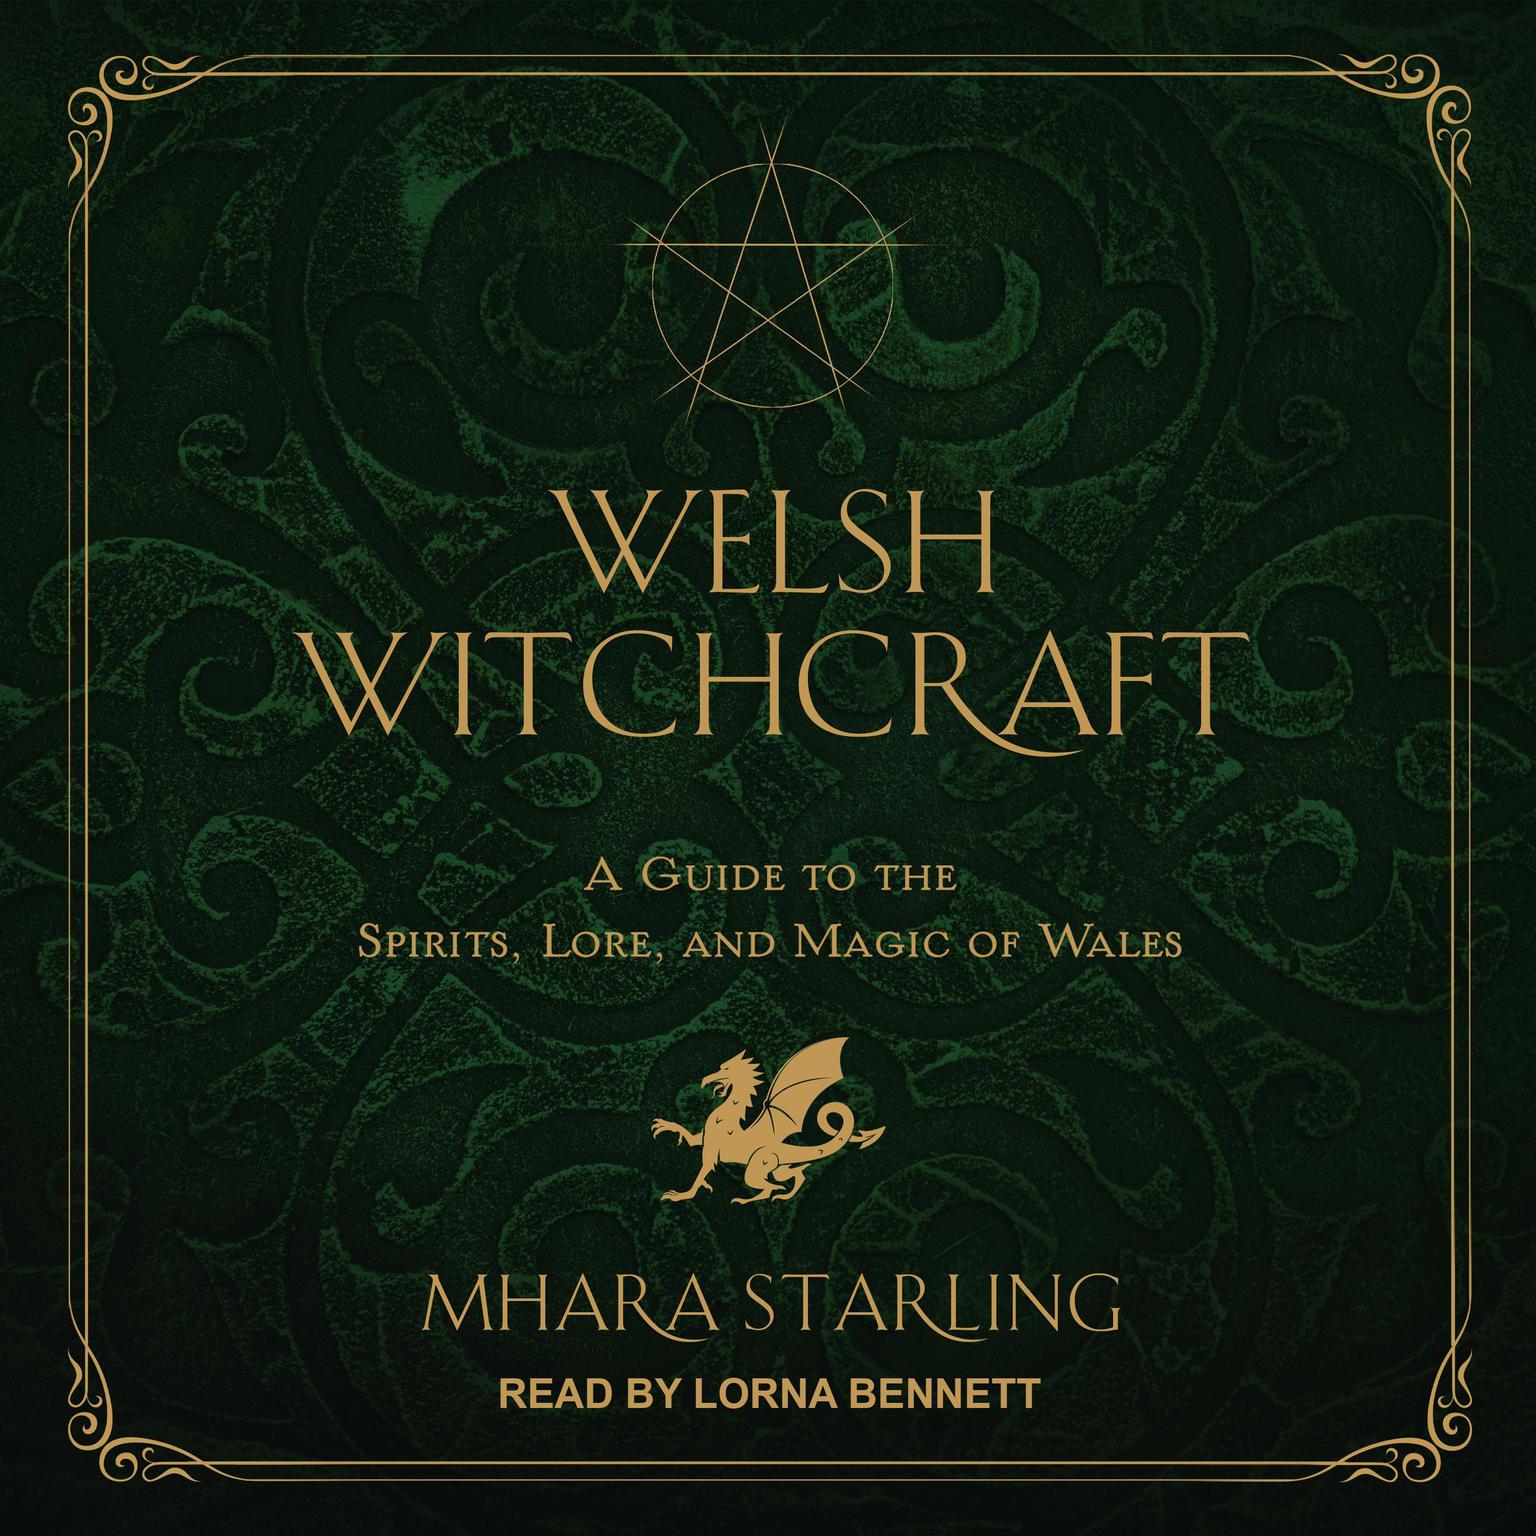 Welsh Witchcraft: A Guide to the Spirits, Lore, and Magic of Wales Audiobook, by Mhara Starling